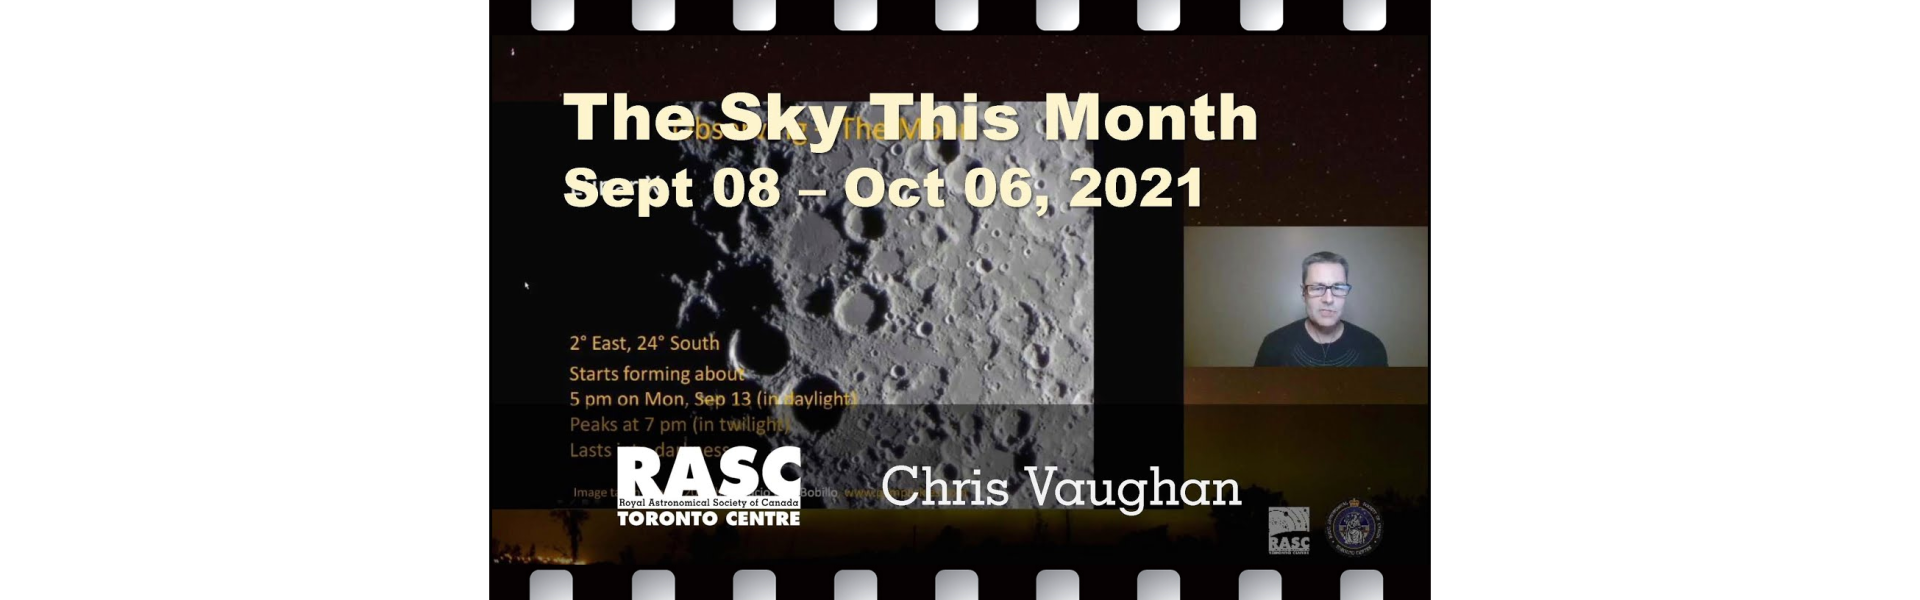 The Sky This Month for September 8 - October 6, 2021